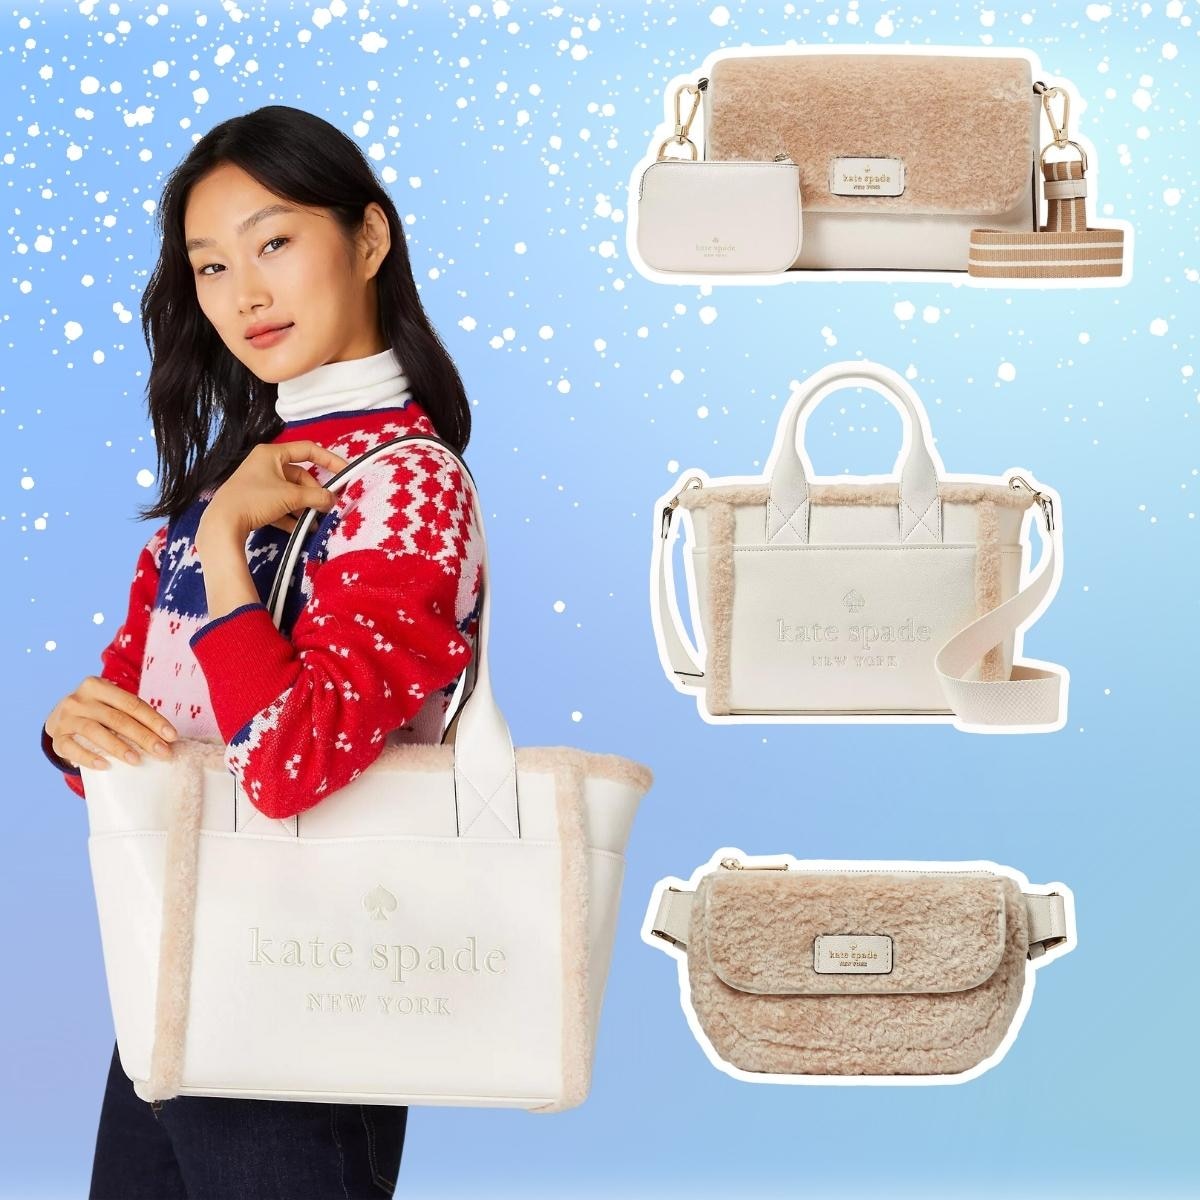 Kate Spade Outlet extended Cyber Monday deals include a $449 Gingerbread  crossbody bag for $224 - mlive.com